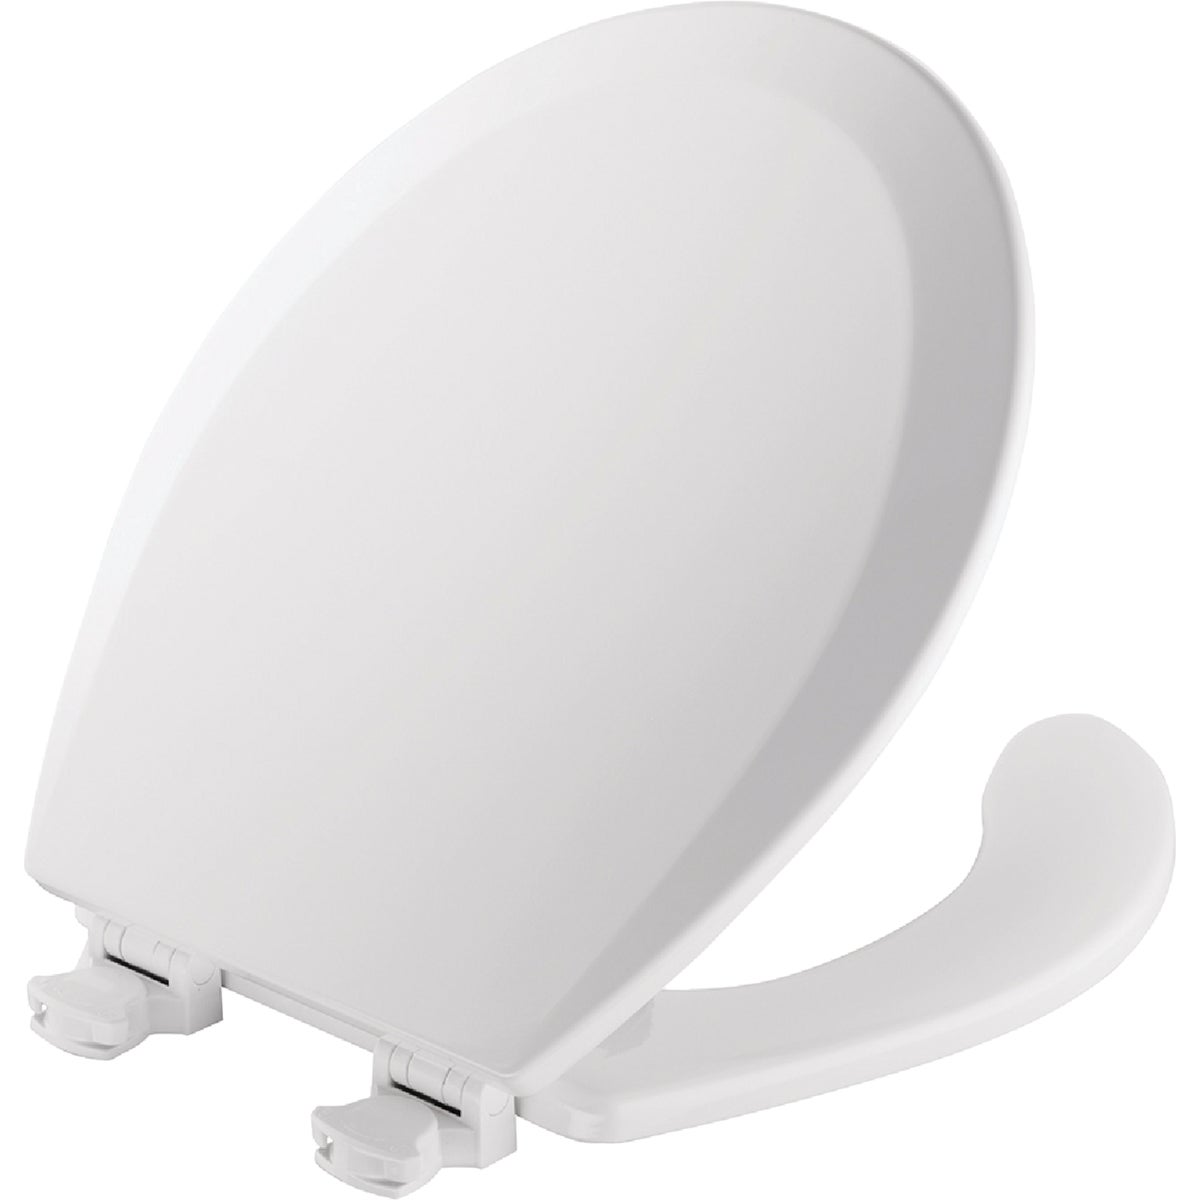 Mayfair Round Open Front White Toilet Seat with Cover